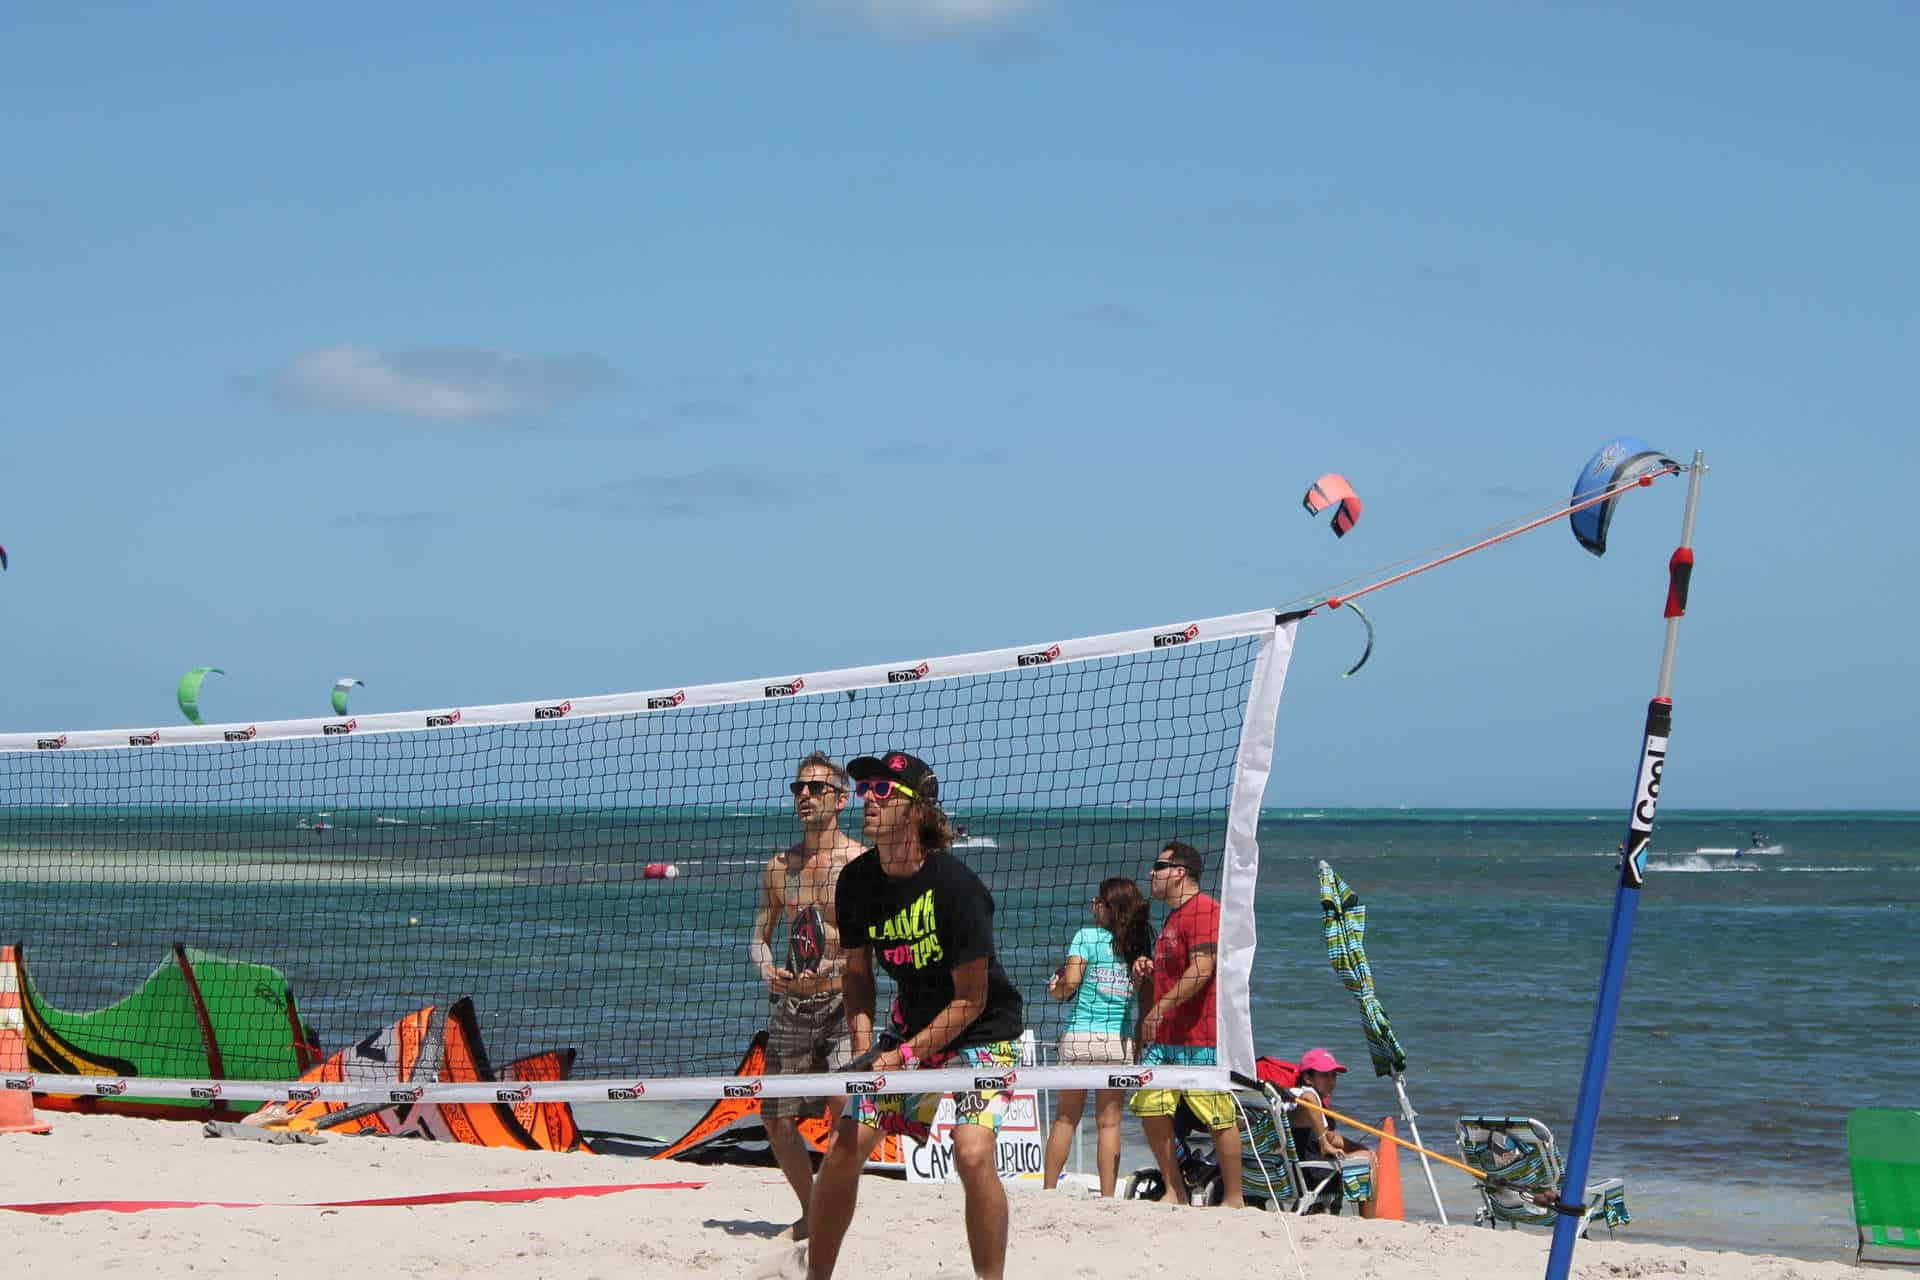 Exciting Beach Tennis Action Wallpaper